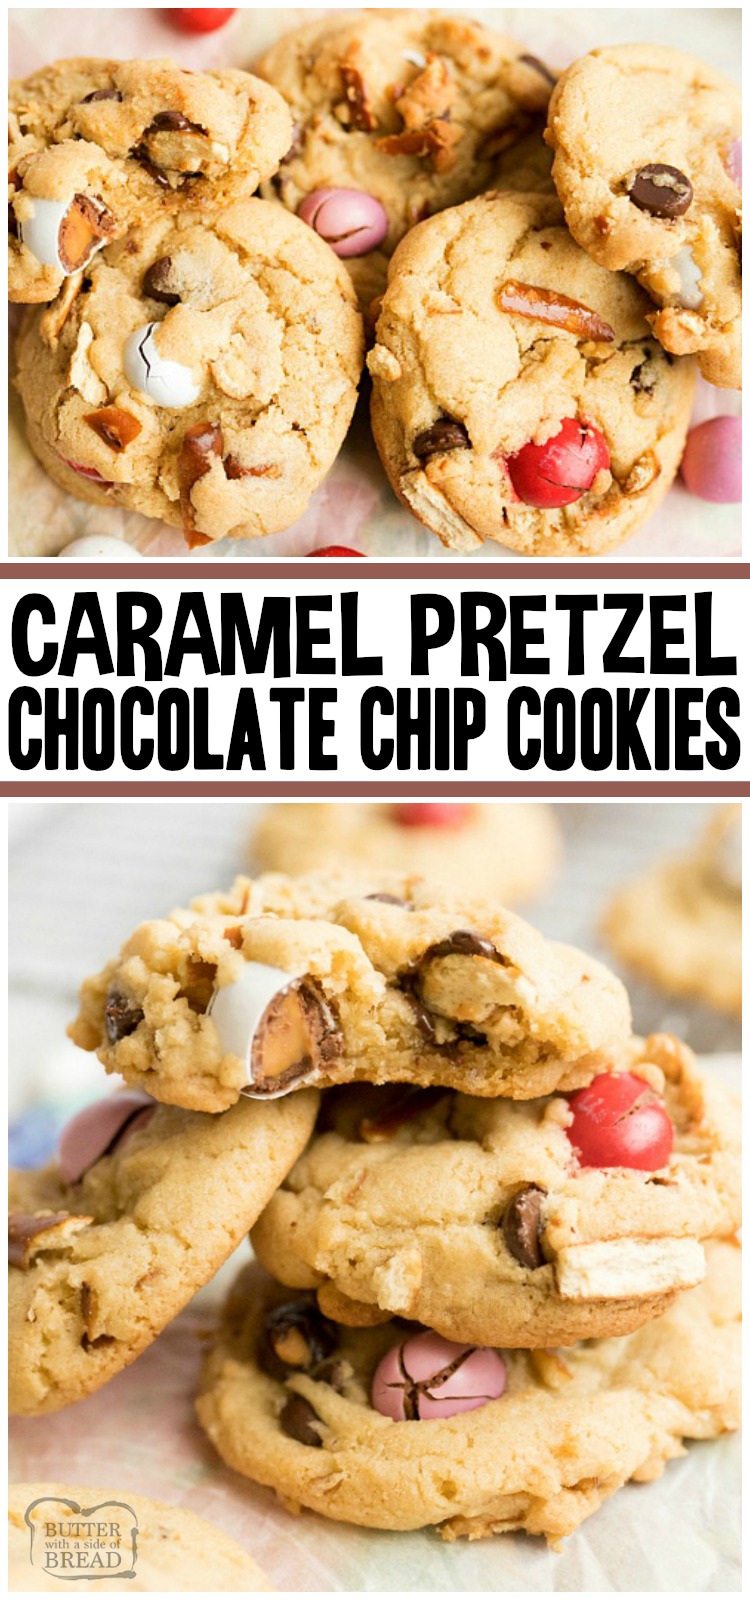 Caramel Pretzel Chocolate Chip Cookies are the ultimate salty sweet combo! Crushed pretzels, Caramel M&M's and semi-sweet chocolate chips all nestled together in buttery cookie dough. Perfect variation on a classic chocolate chip cookie recipe! #cookies #caramel #pretzel #chocolate #chocolatechip #dessert #baking #recipe from BUTTER WITH A SIDE OF BREAD